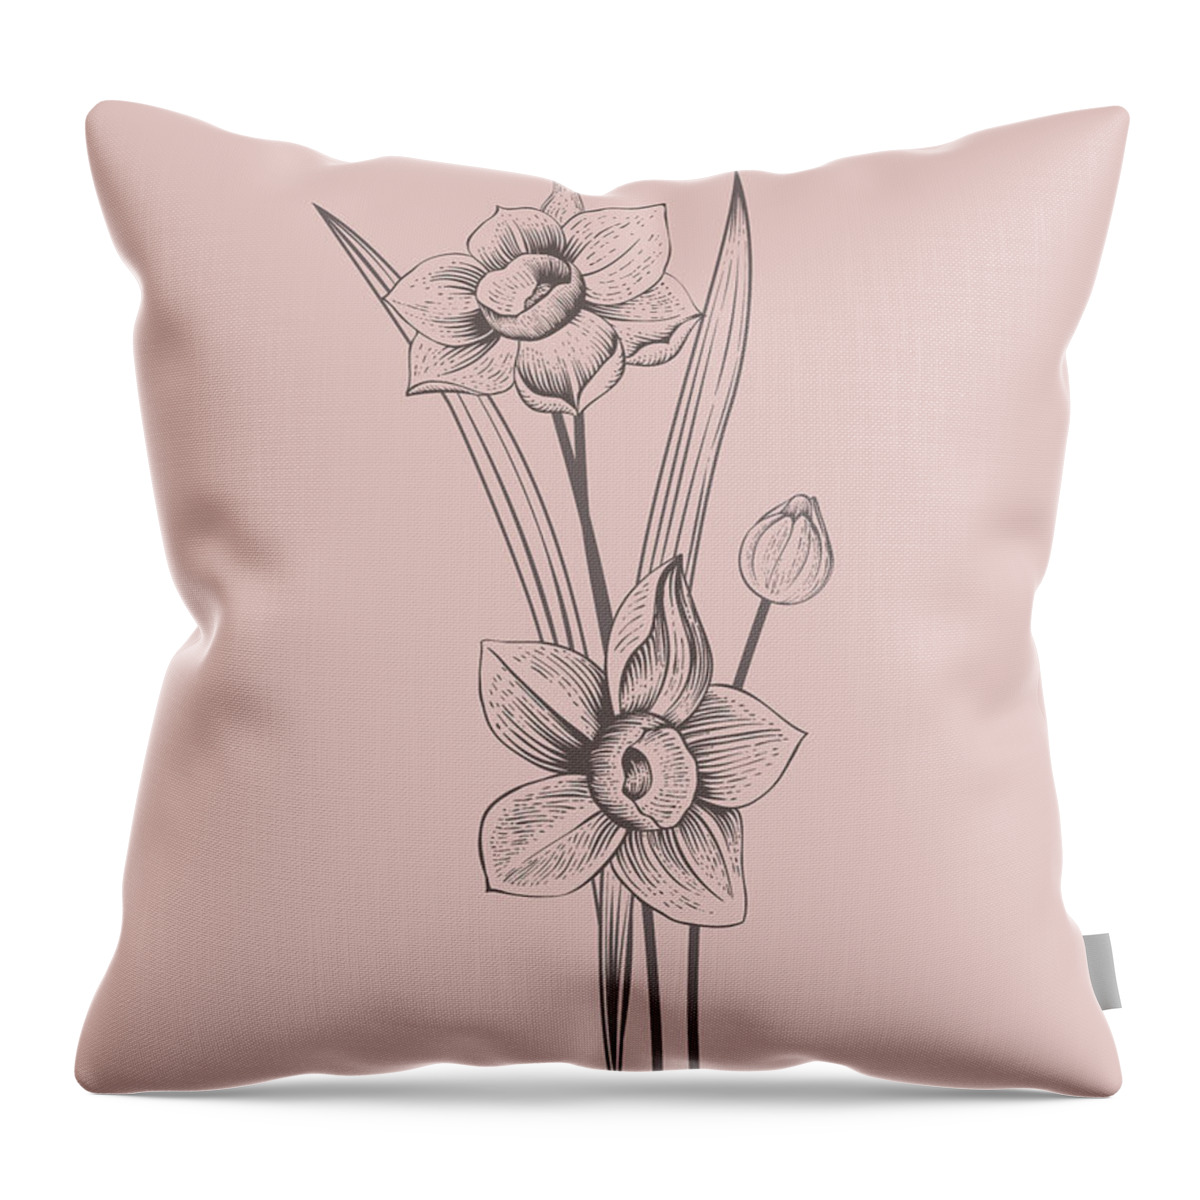 Narcissus Throw Pillow featuring the mixed media Narcissus Blush Pink Flower by Naxart Studio